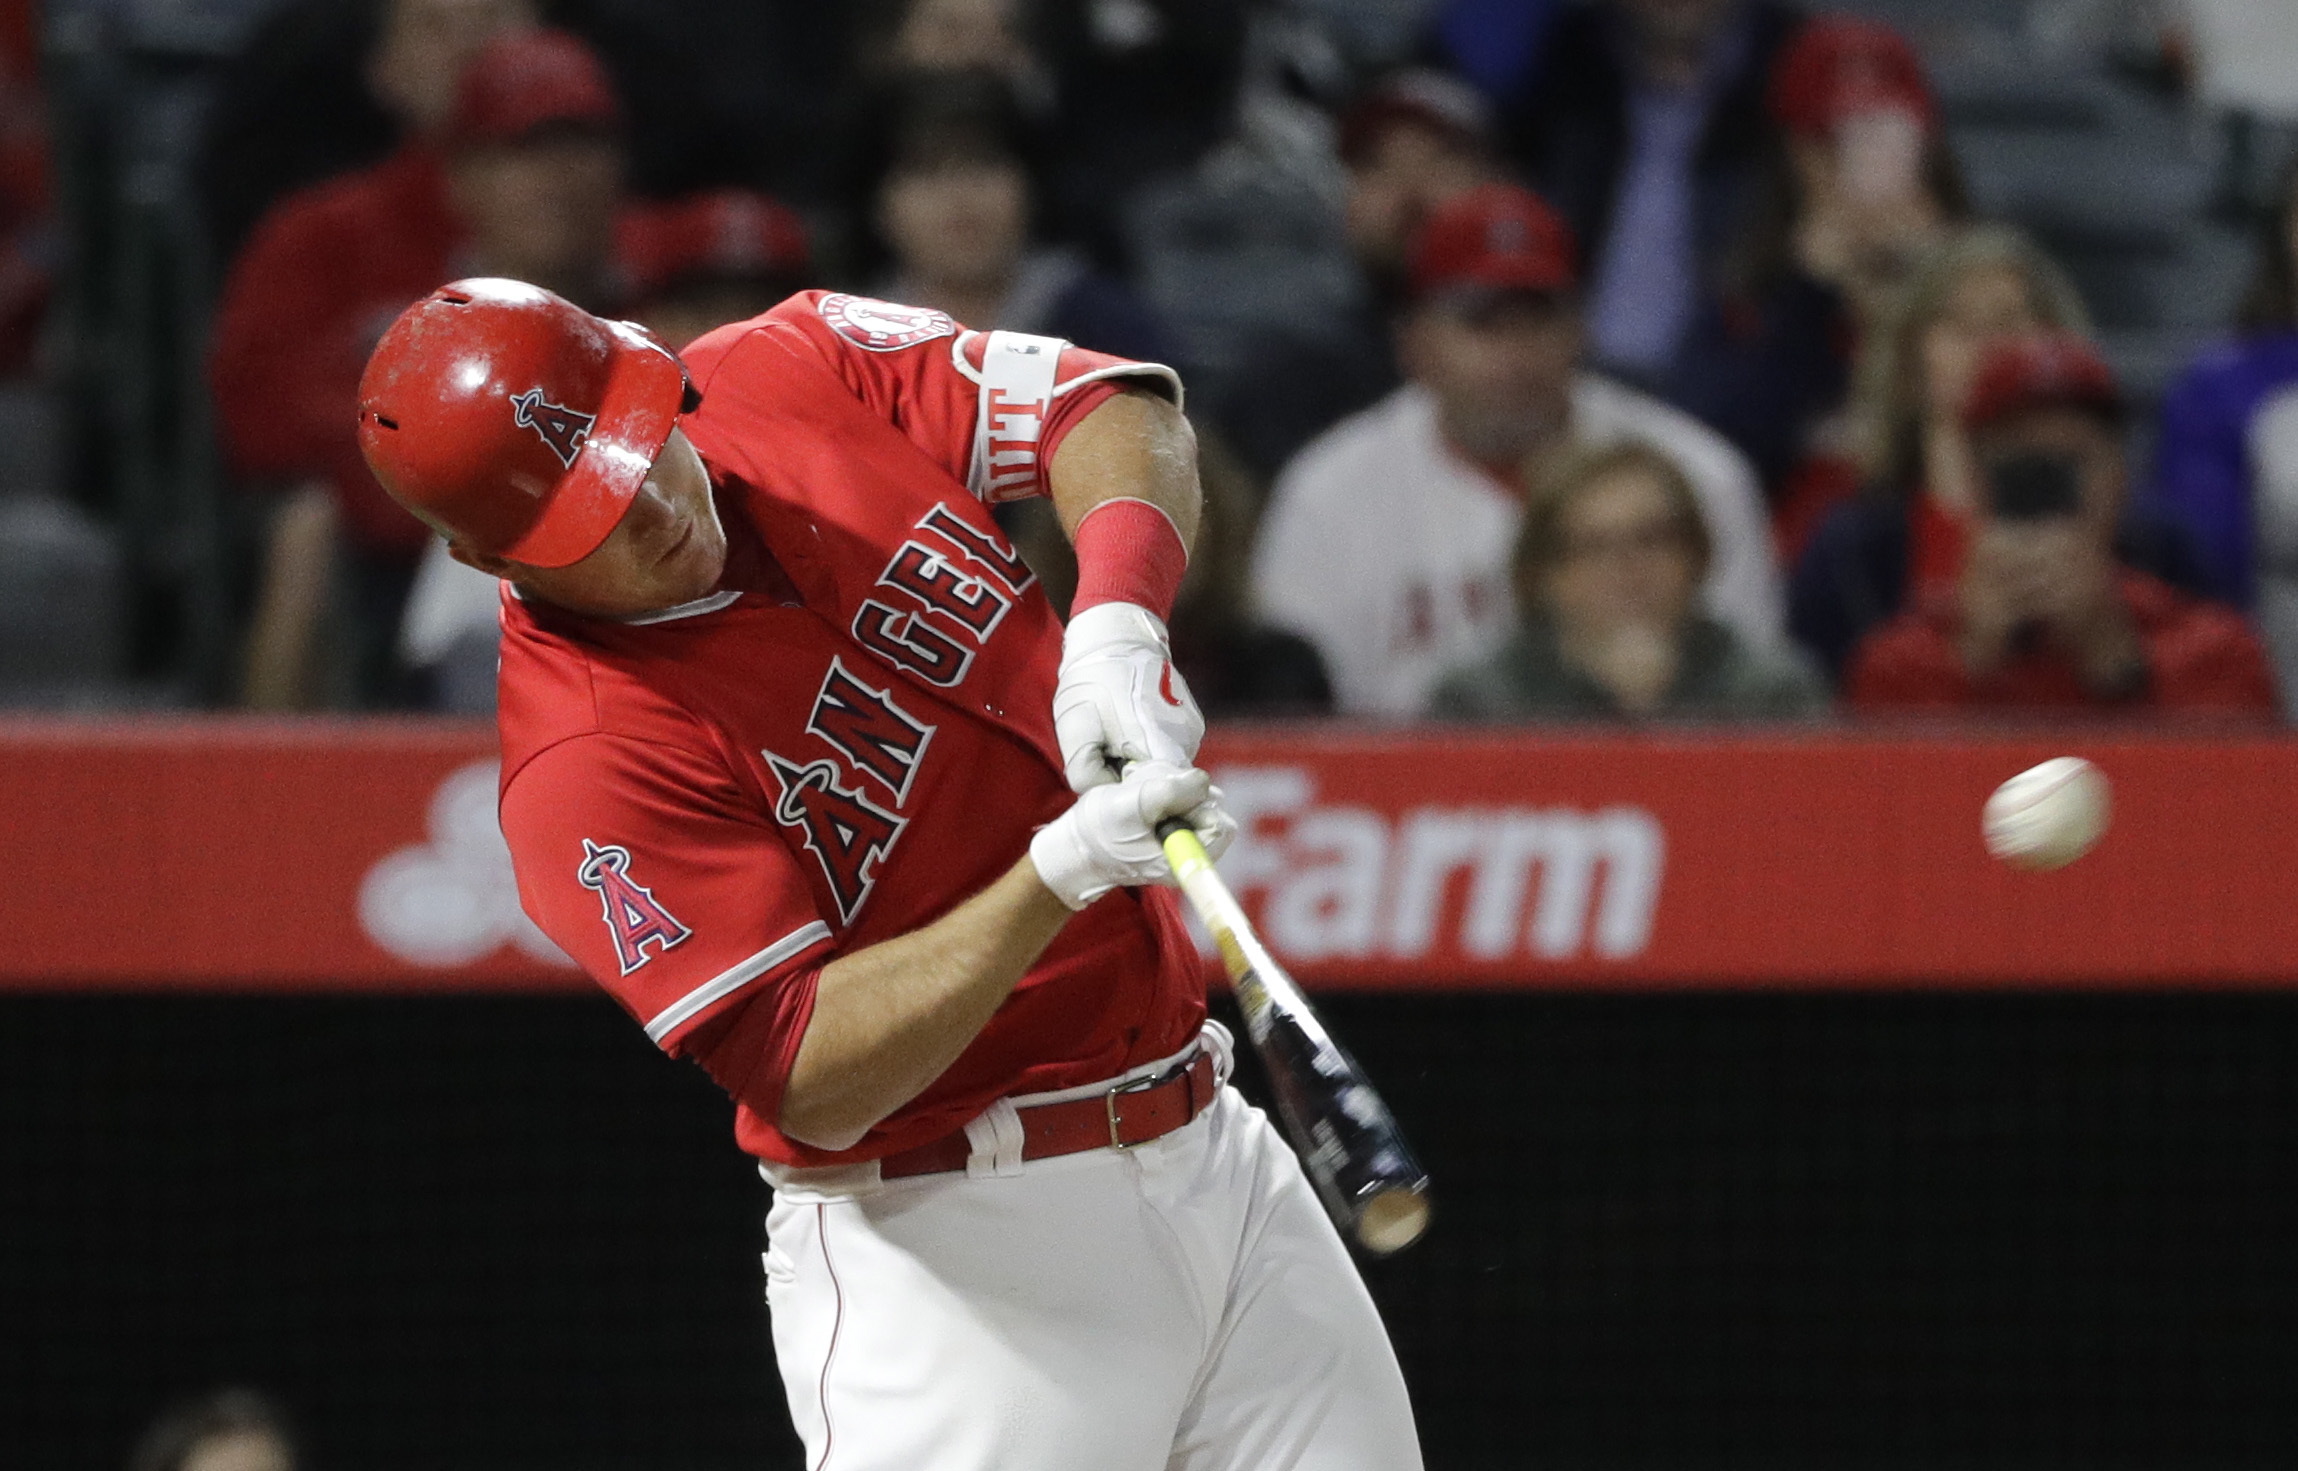 Los Angeles Angels' Mike Trout hits a two-run home run during the seventh inning of the team's baseball game against the Seattle Mariners on Saturday, April 8, 2017, in Anaheim, Calif. (AP Photo/Jae C.